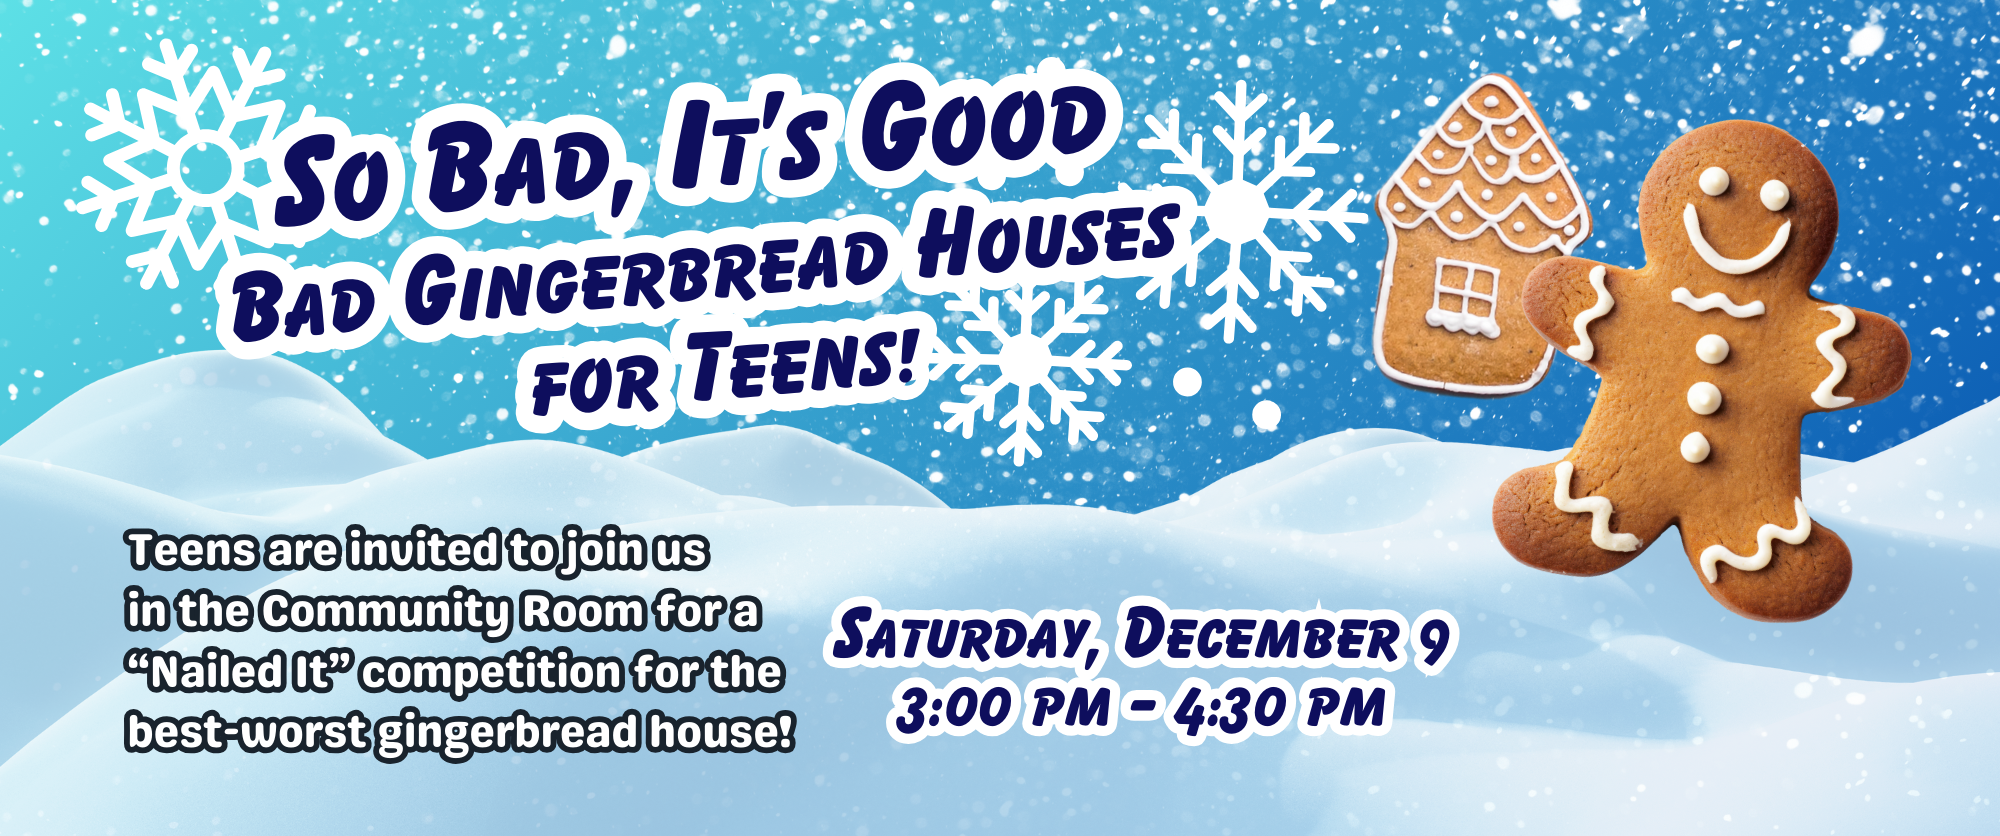 So Bad, It’s Good - Bad Gingerbread Houses for Teens!